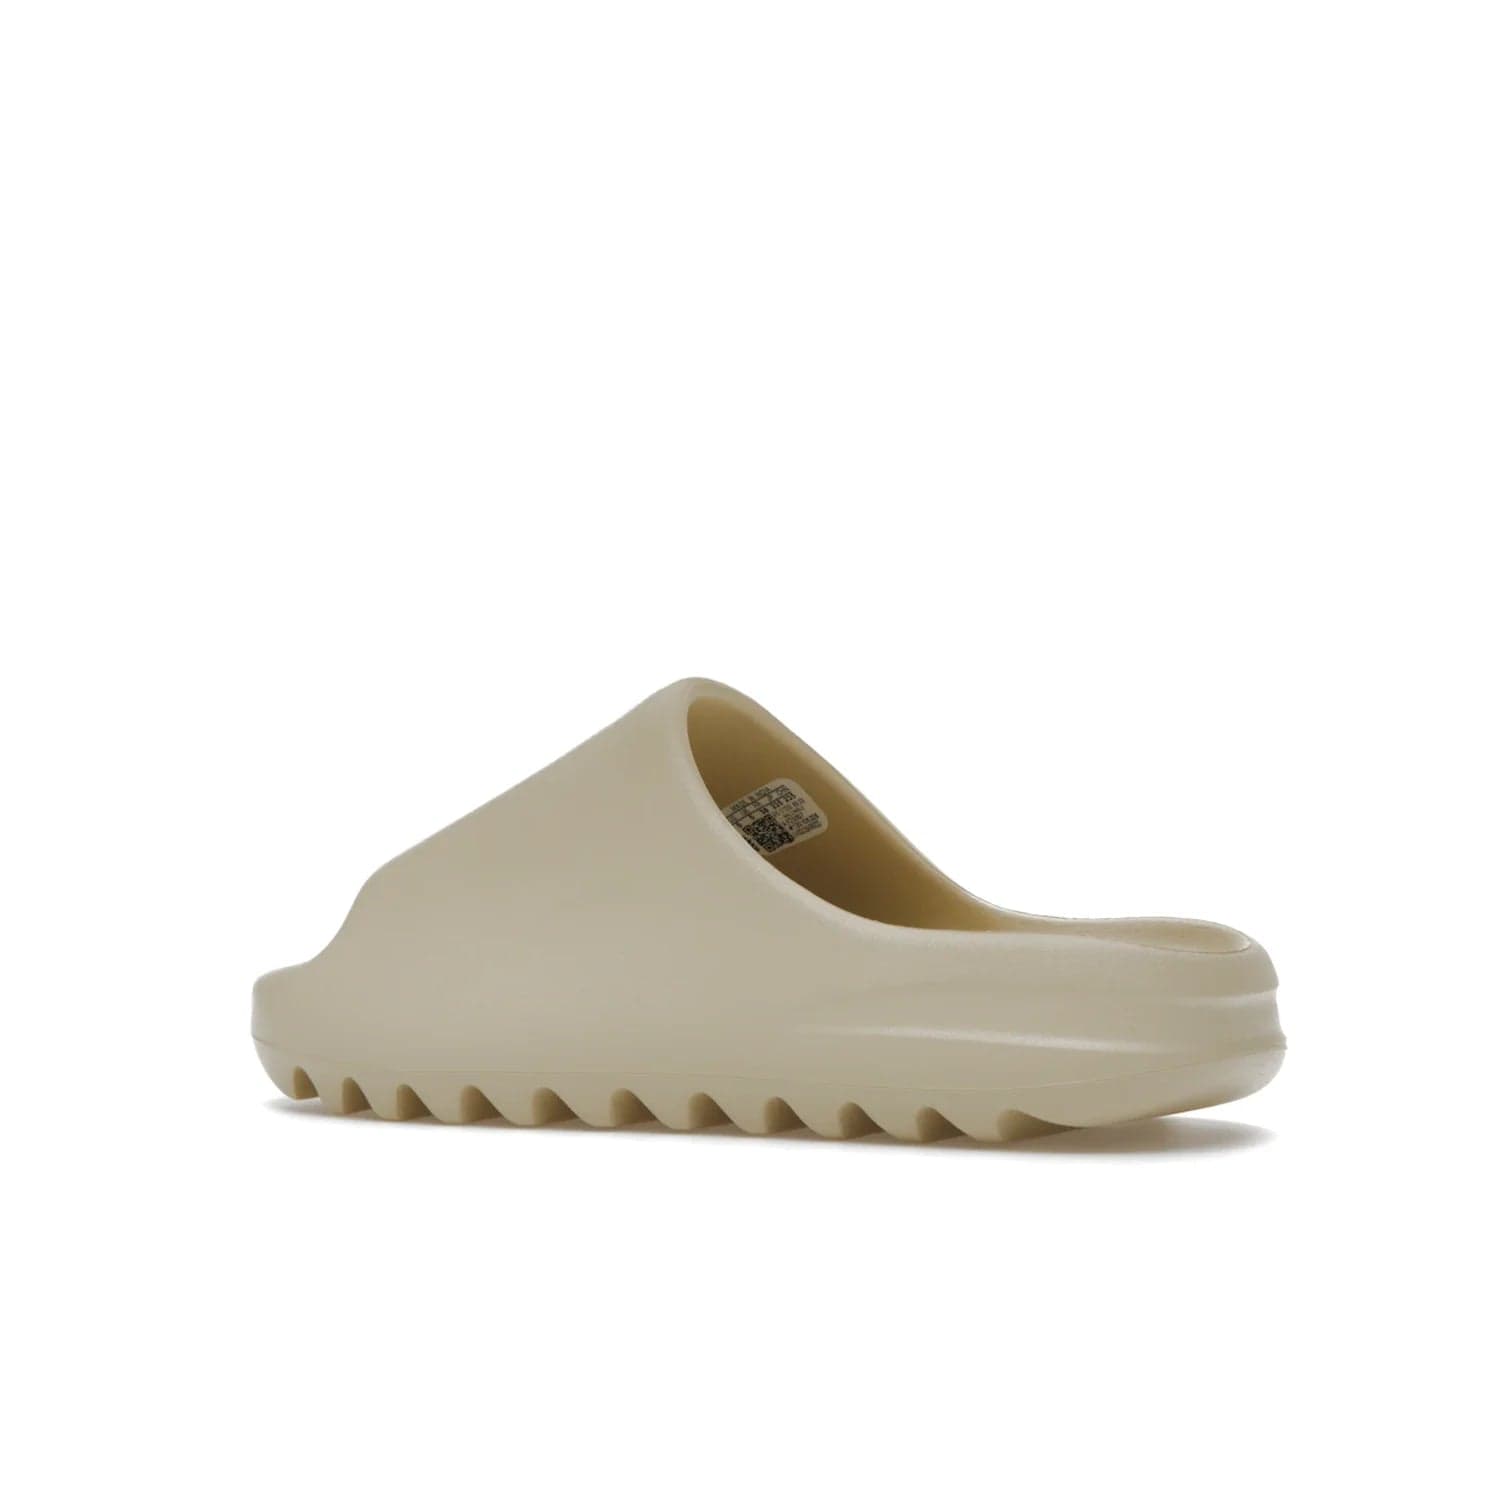 adidas Yeezy Slide Bone (2022 Restock) - Image 22 - Only at www.BallersClubKickz.com - Stay comfy with the adidas Yeezy Slide Bone - a fashionable silhouette with all-day comfort. This Bone/Bone/Bone colorway combines style and comfort with a pebbled texture and grooved sole. Restocked in May 2022, this shoe is the perfect addition to your collection.